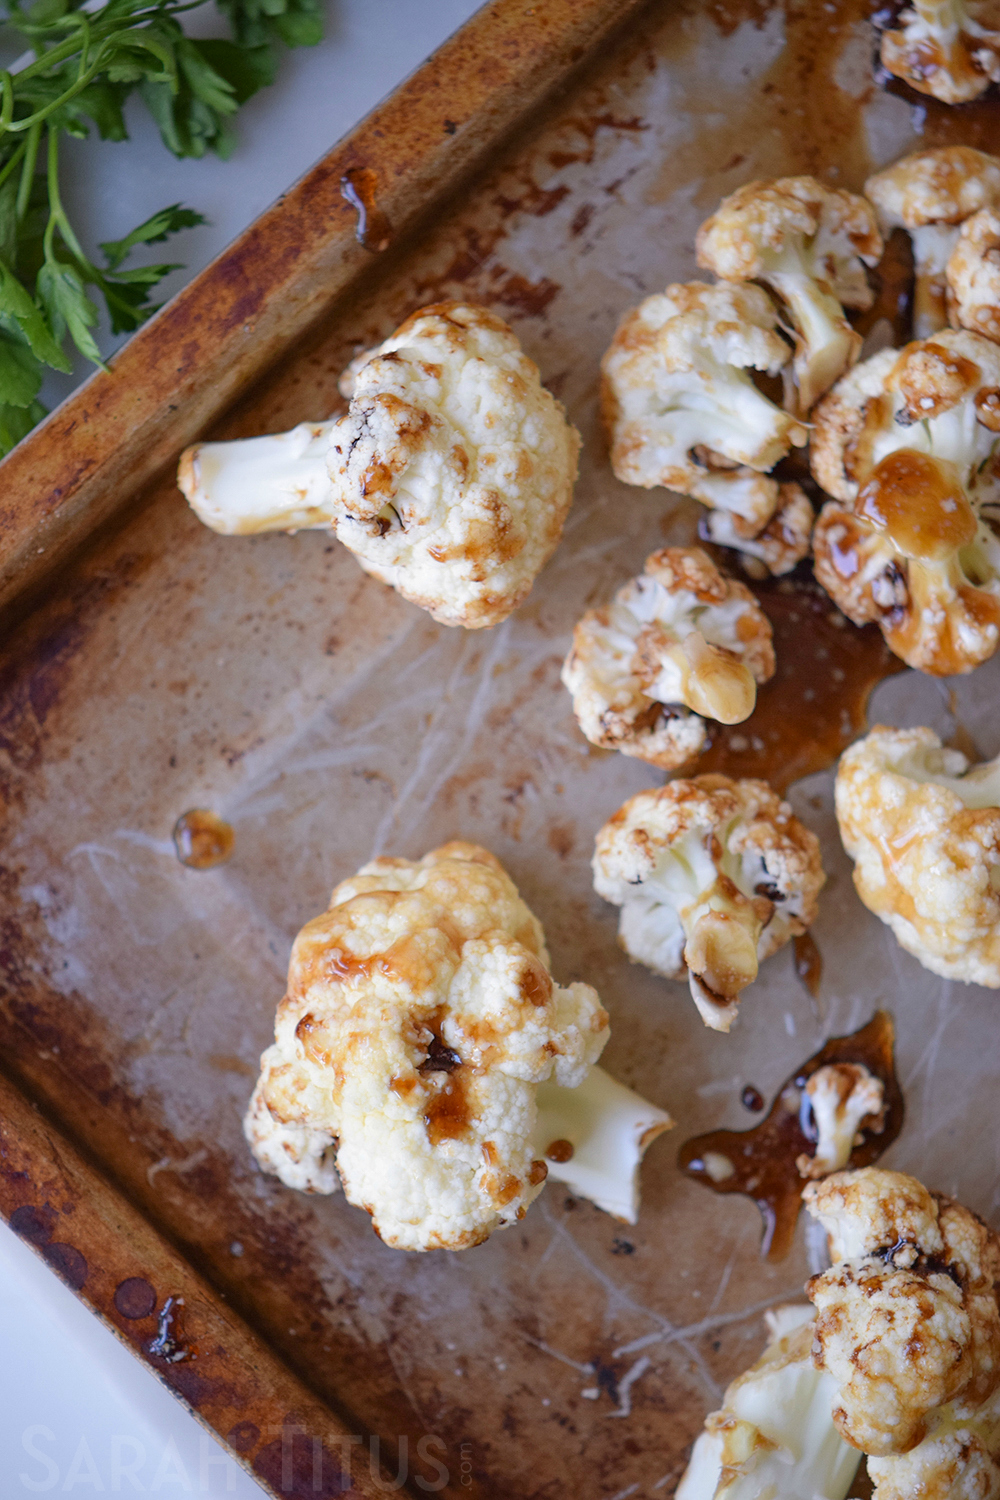 The sticky cauliflower bites spread out on a baking sheet ready to go in the oven